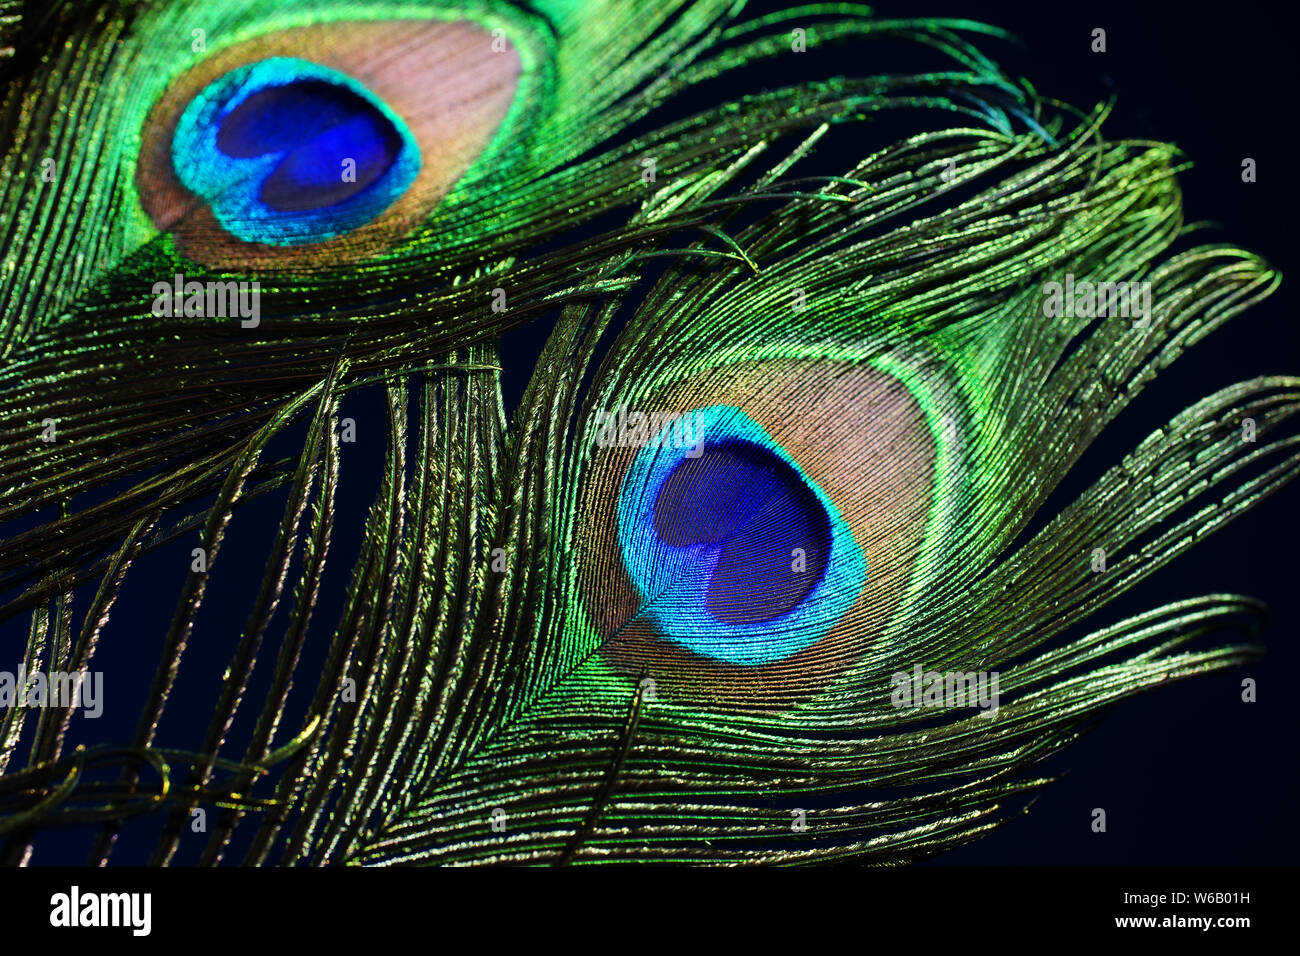 Peacock feather on black background Stock Photo - Alamy